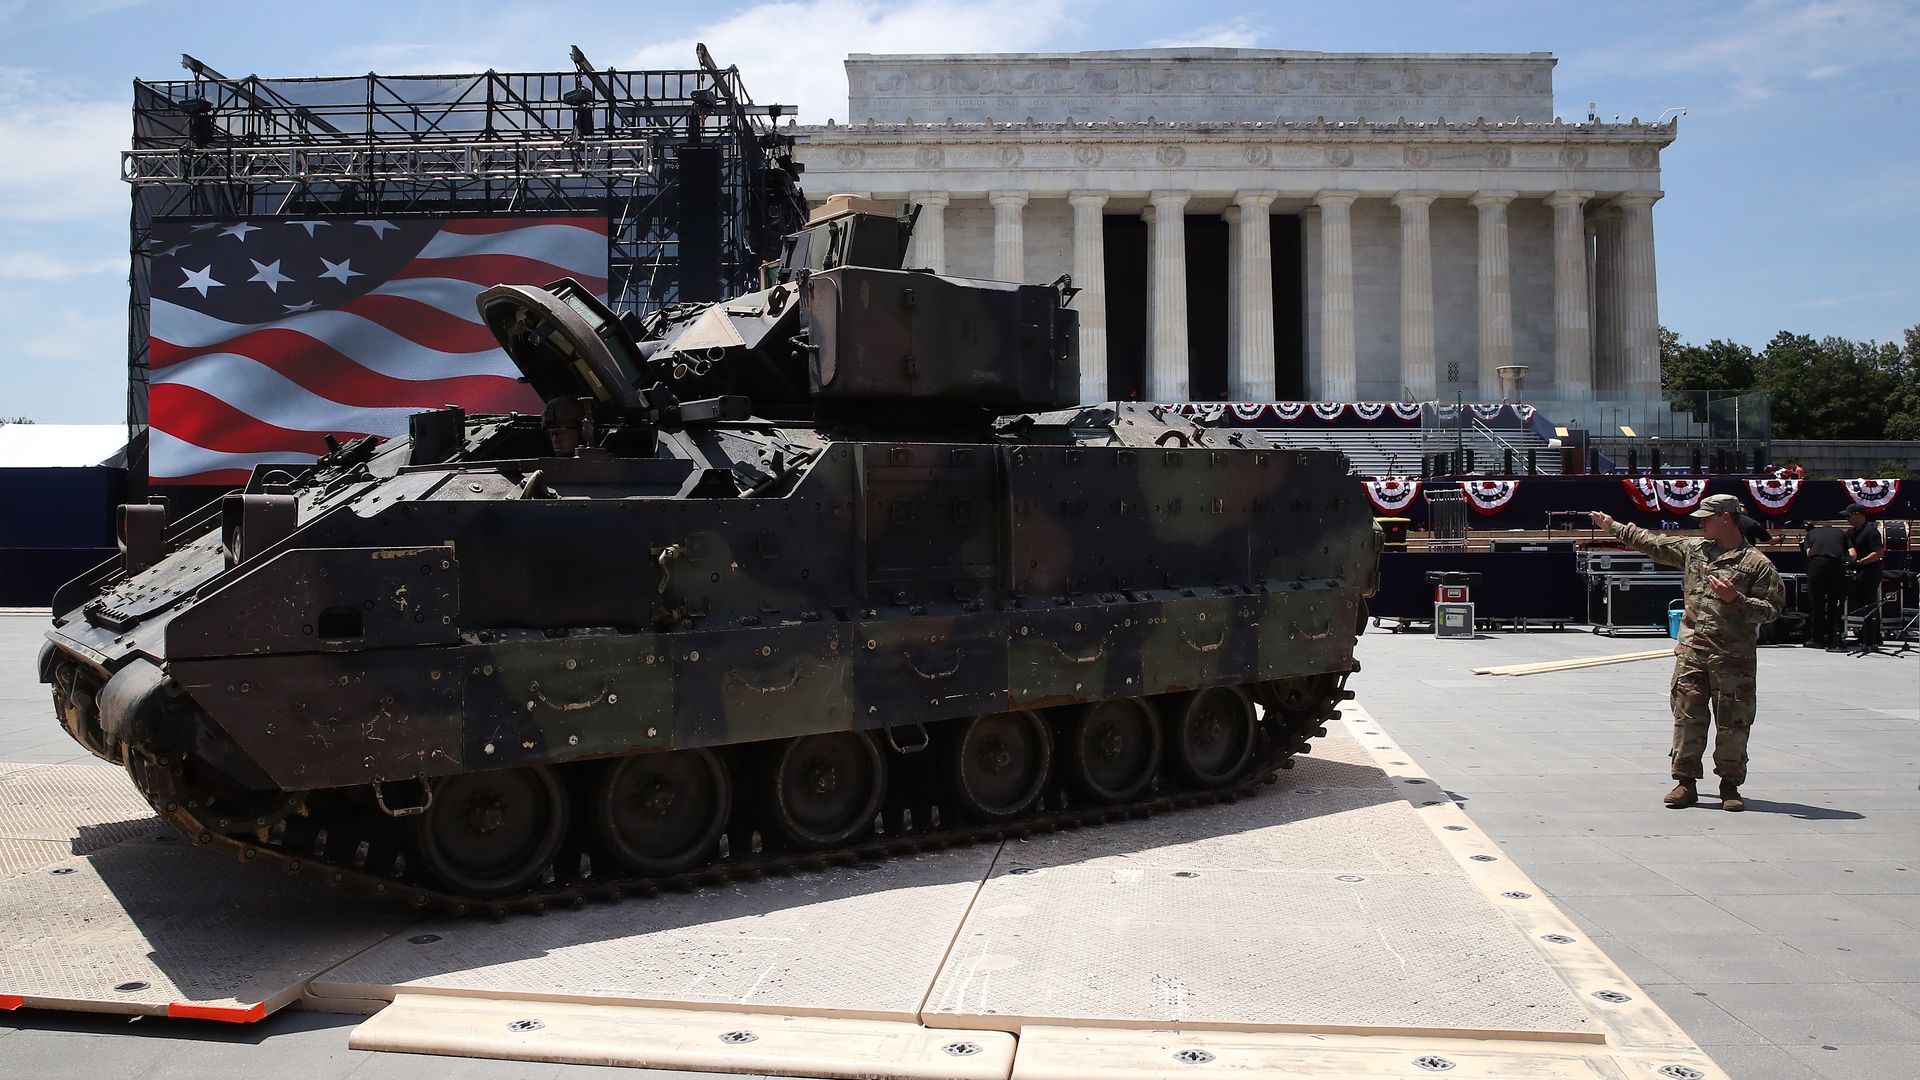 Members of the U.S. Army park an M1 Abrams tank in front of the Lincoln Memorial.